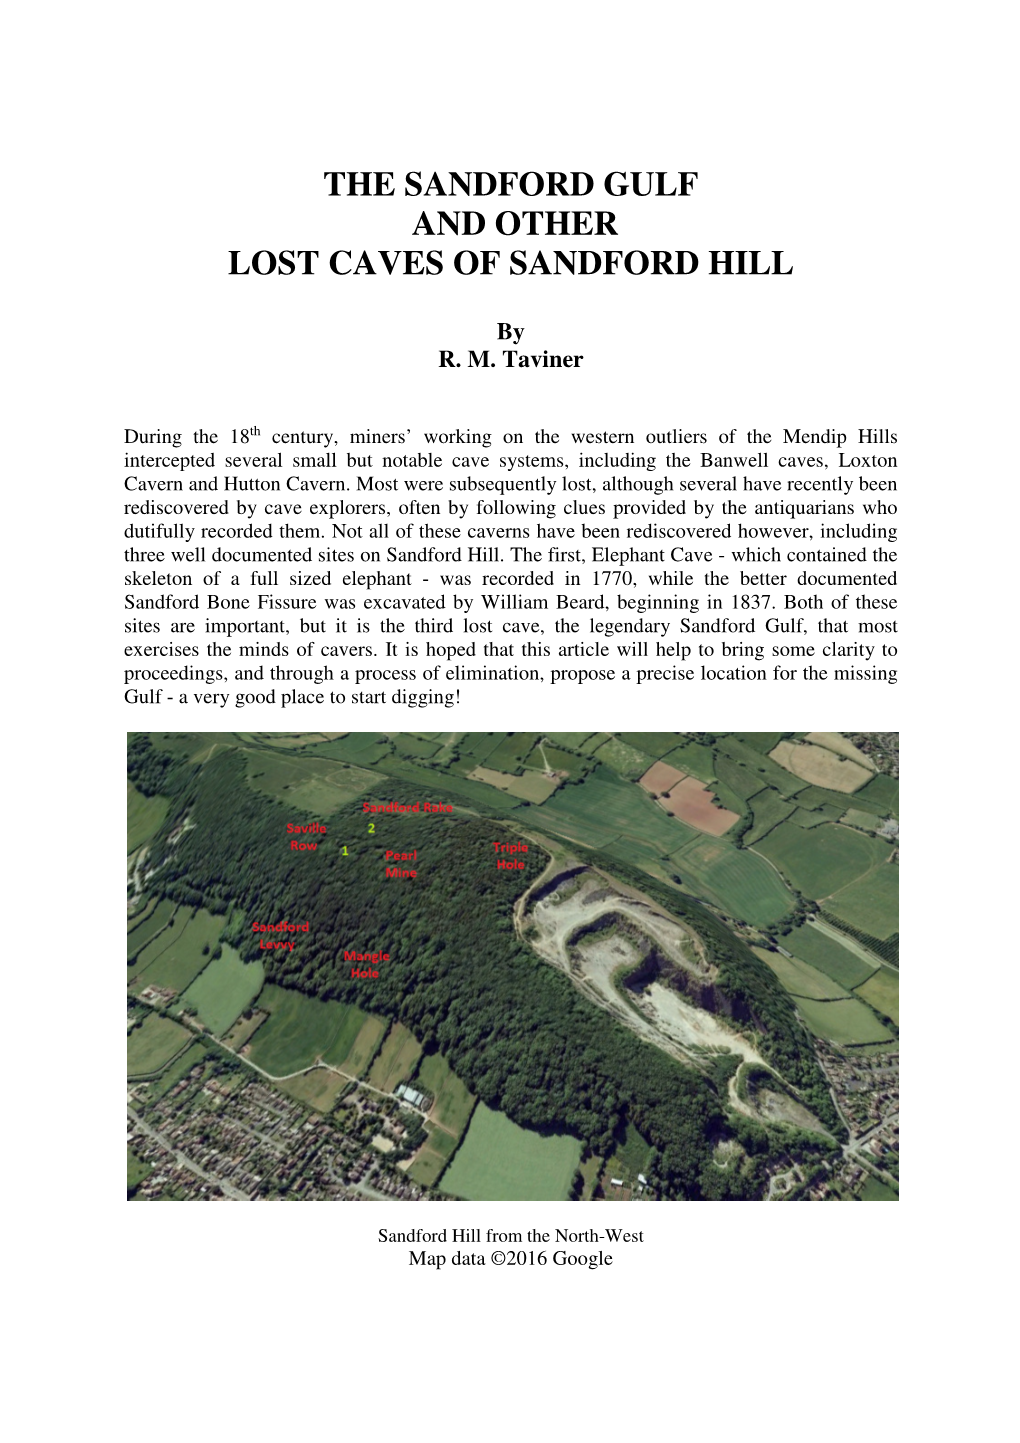 The Sandford Gulf and Other Lost Caves of Sandford Hill